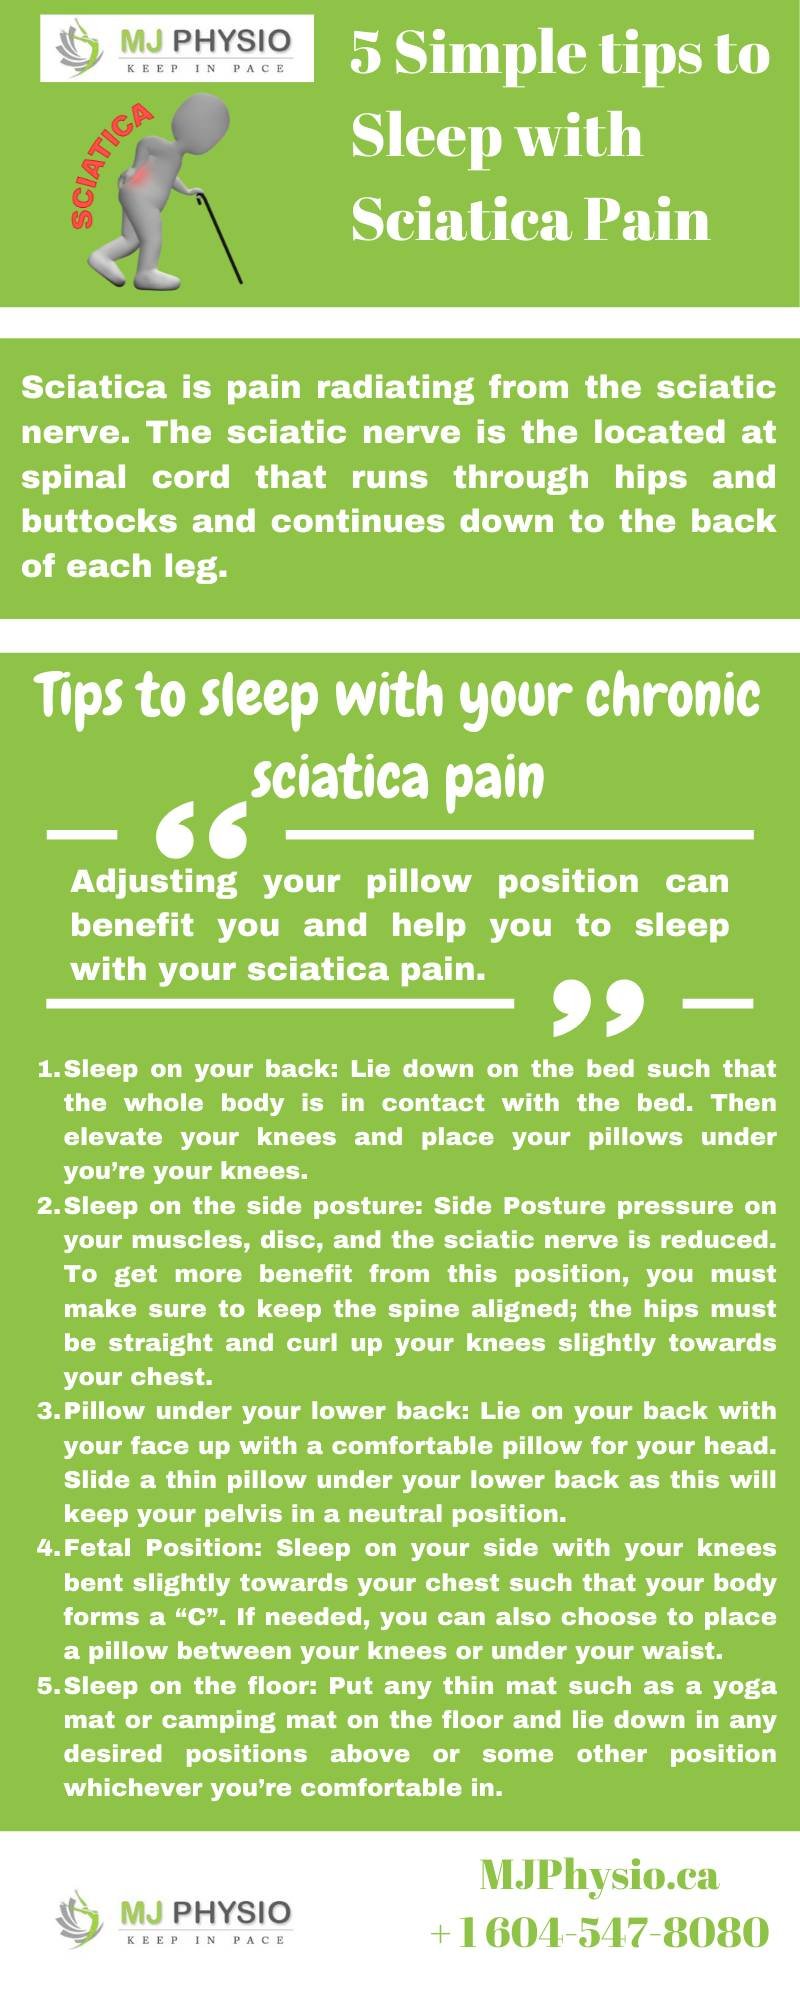 5 Simple tips to Sleep with Sciatica Pain